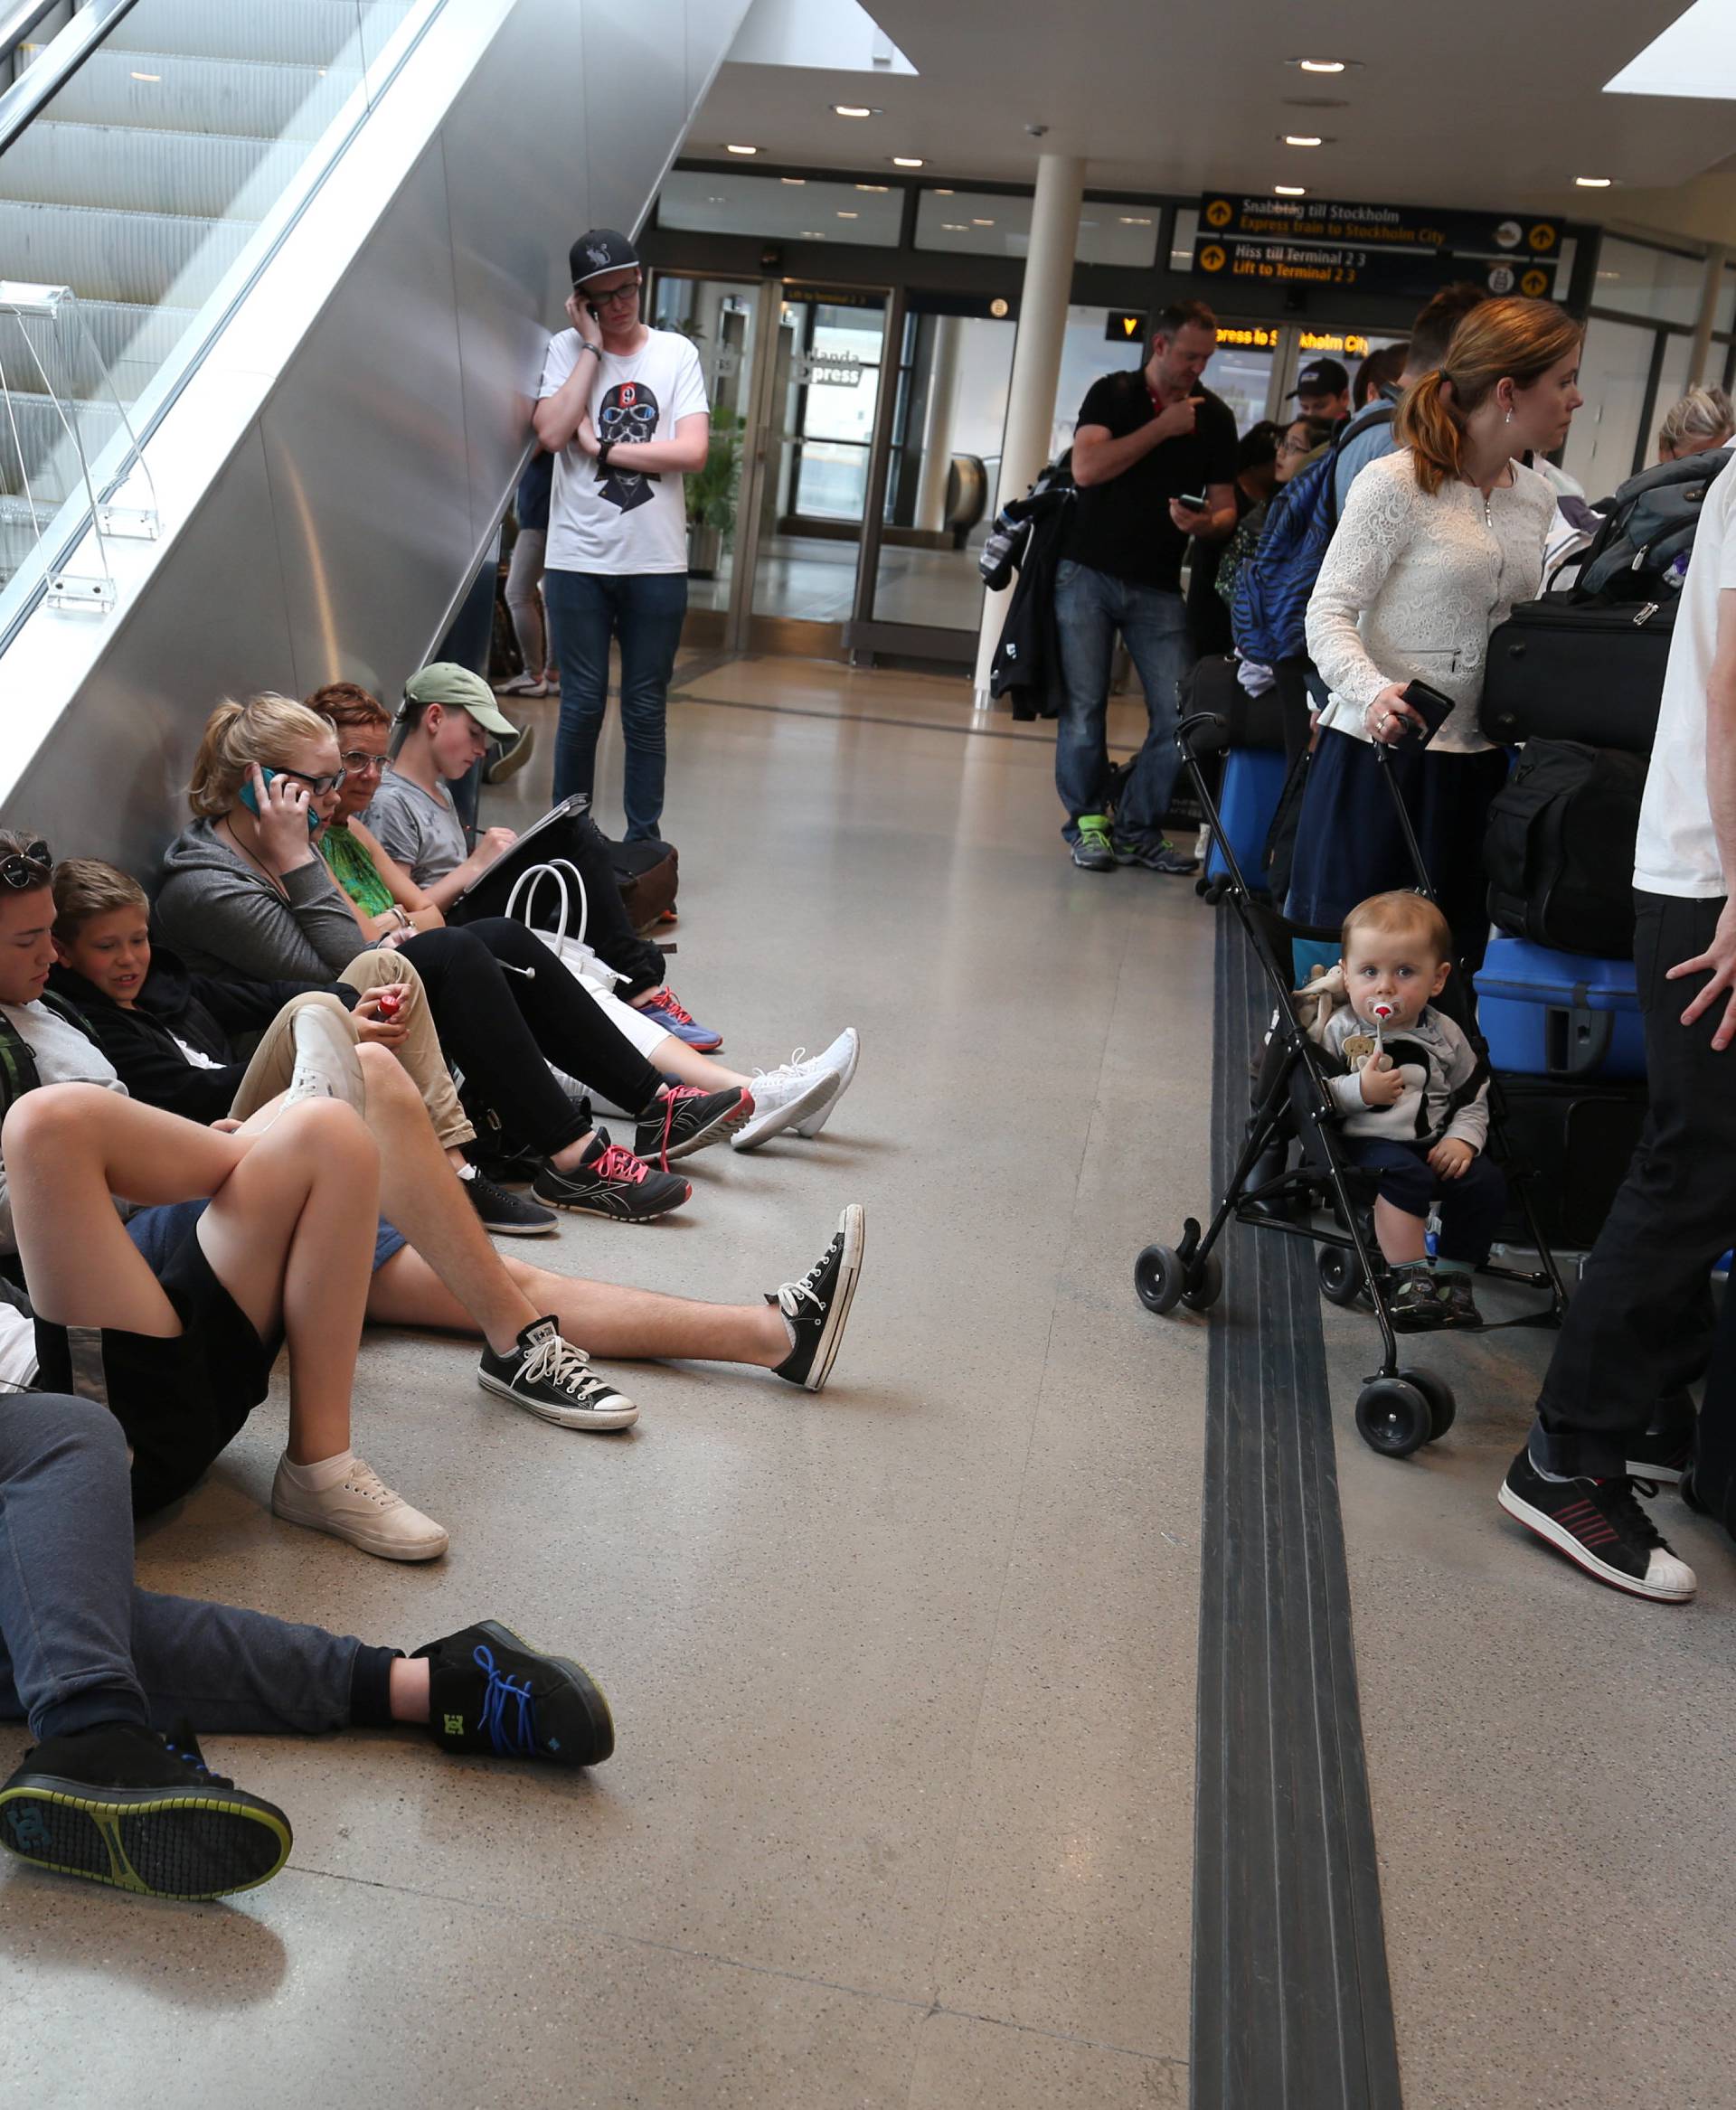 Passengers wait for flight information at the domestic terminal of Arlanda airport in Stockholm